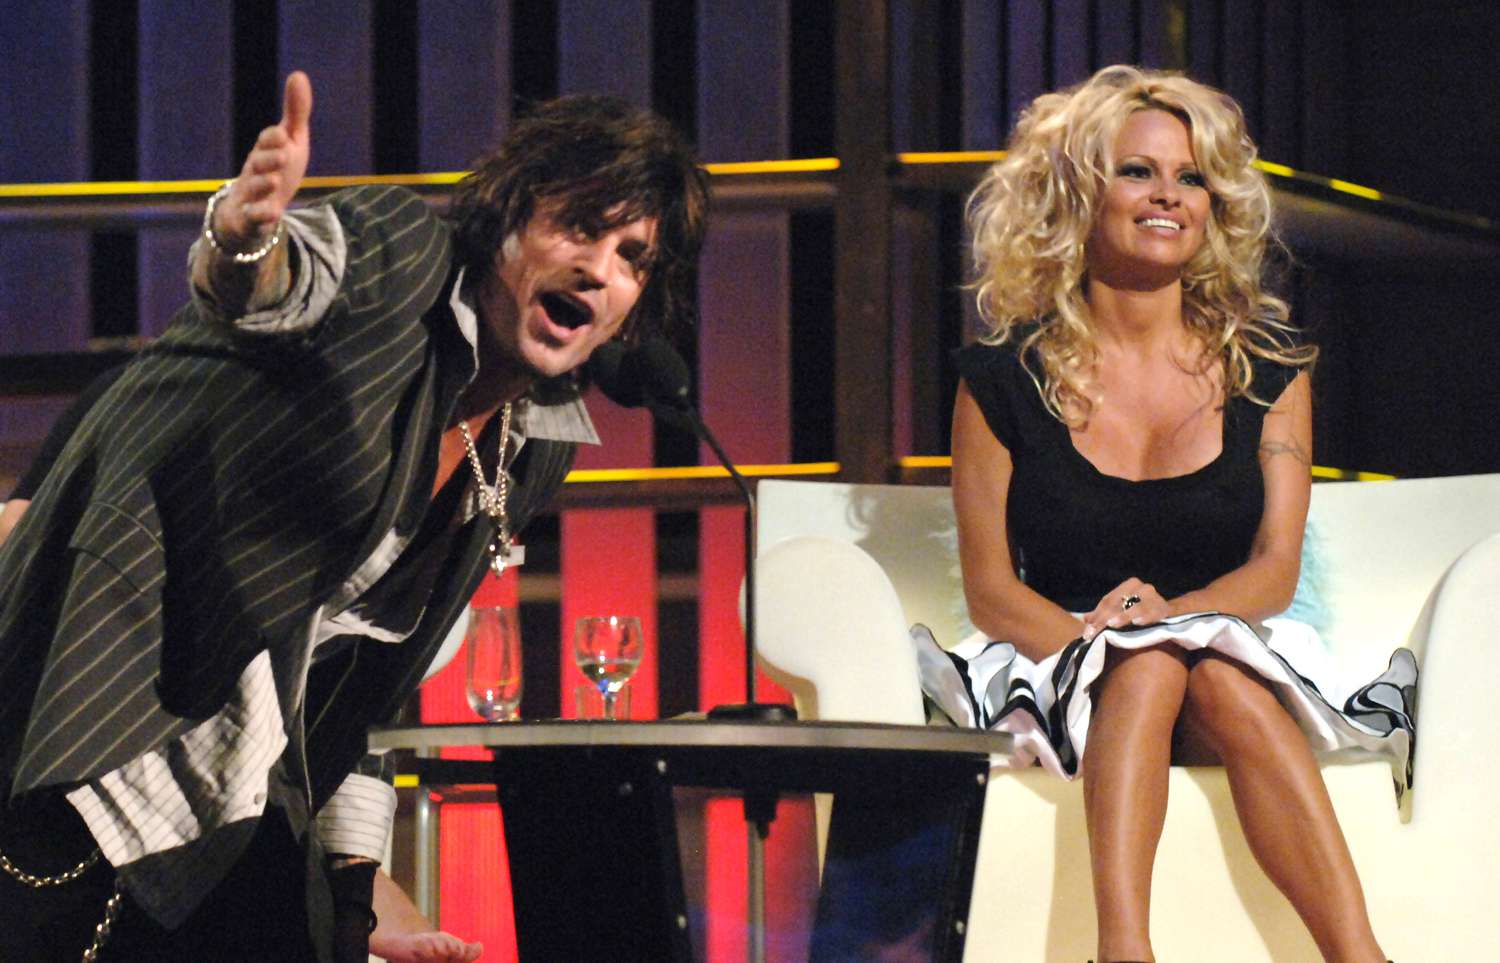 Tommy Lee and Pamela Anderson during Comedy Central Roast of Pamela Anderson